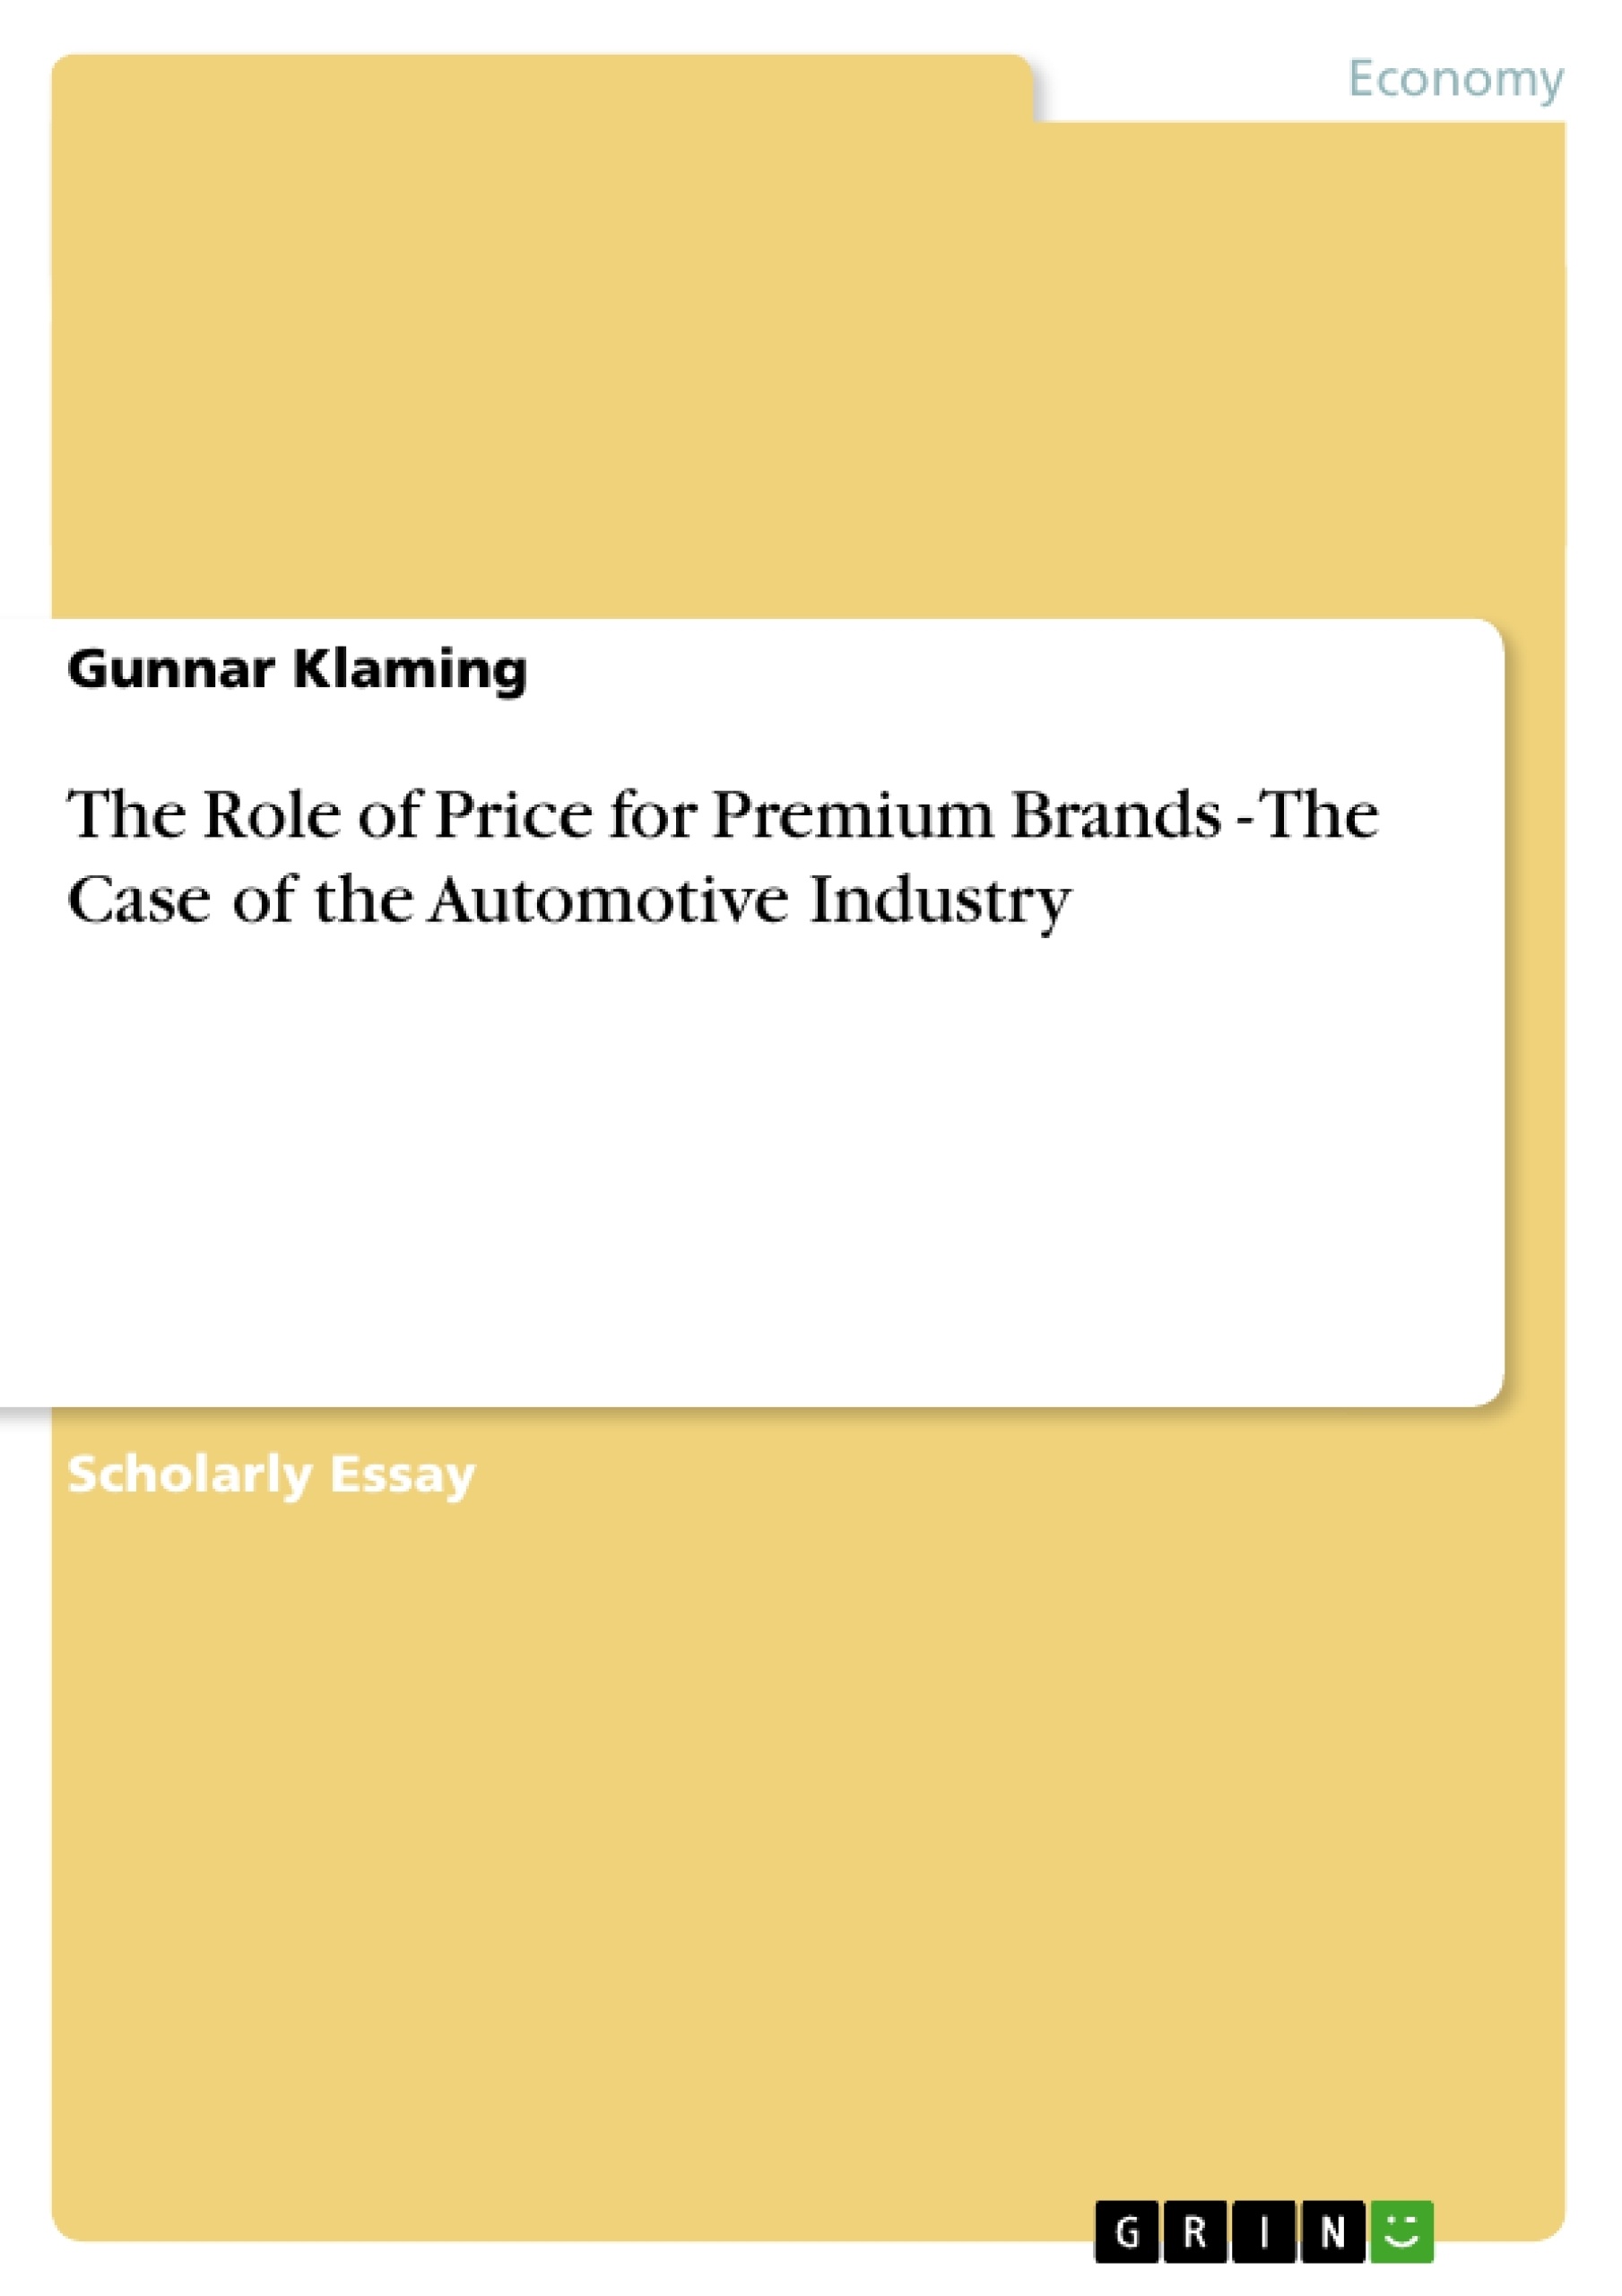 Titel: The Role of Price for Premium Brands - The Case of the Automotive Industry